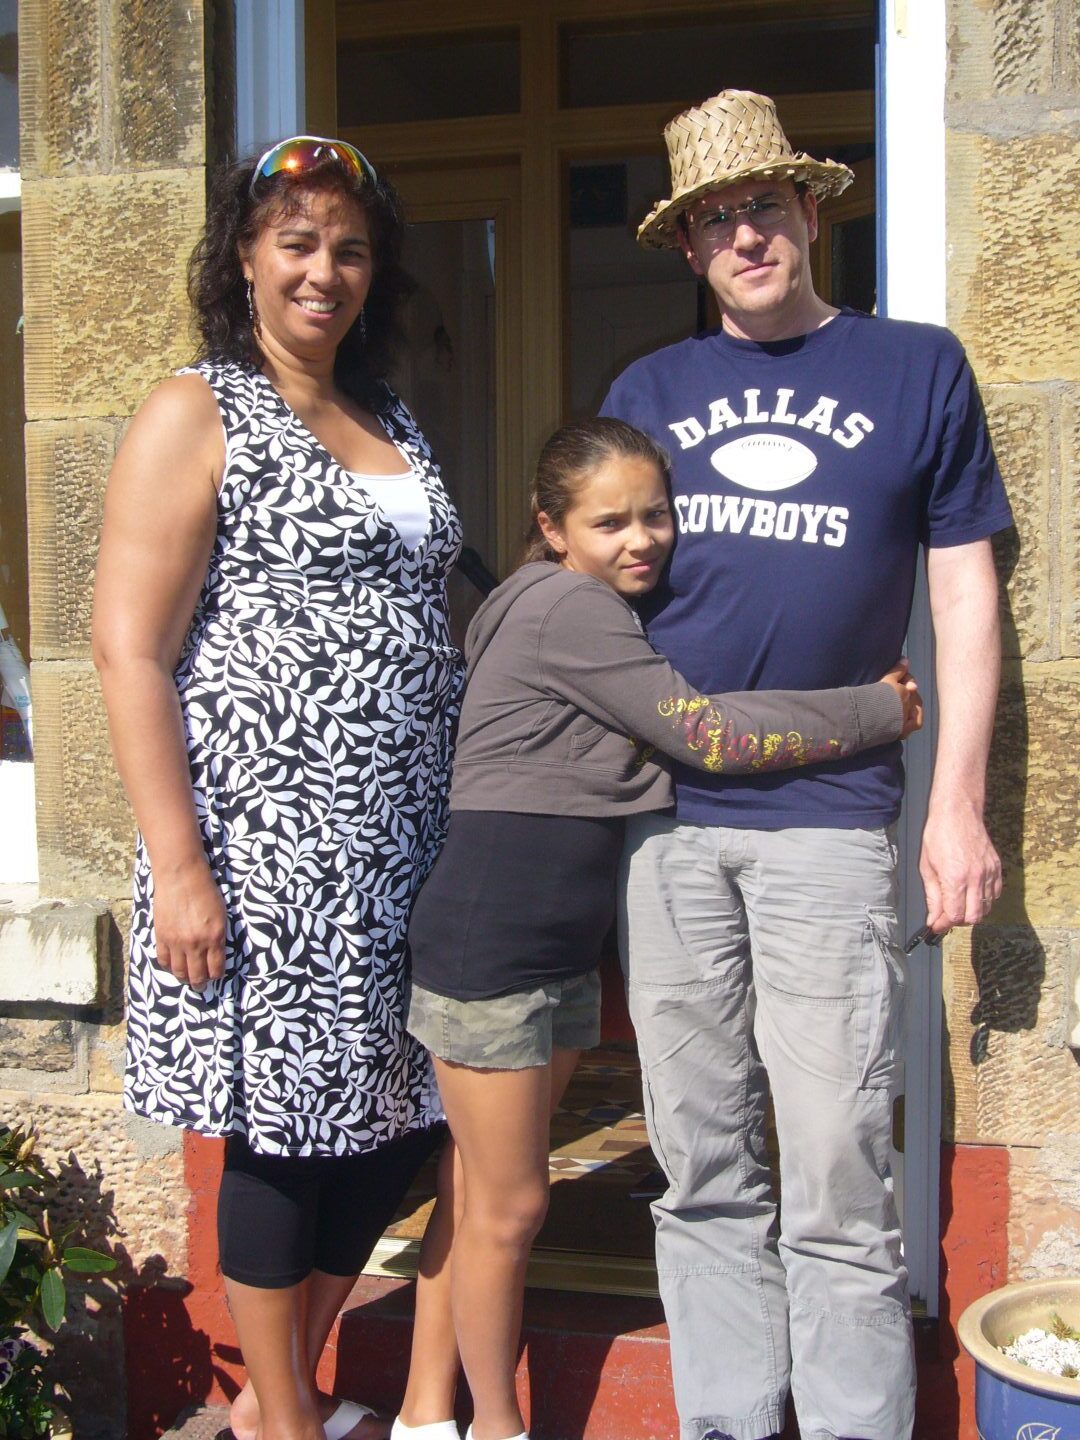 Tamzene with her mum Jermaine and step-dad Campbell